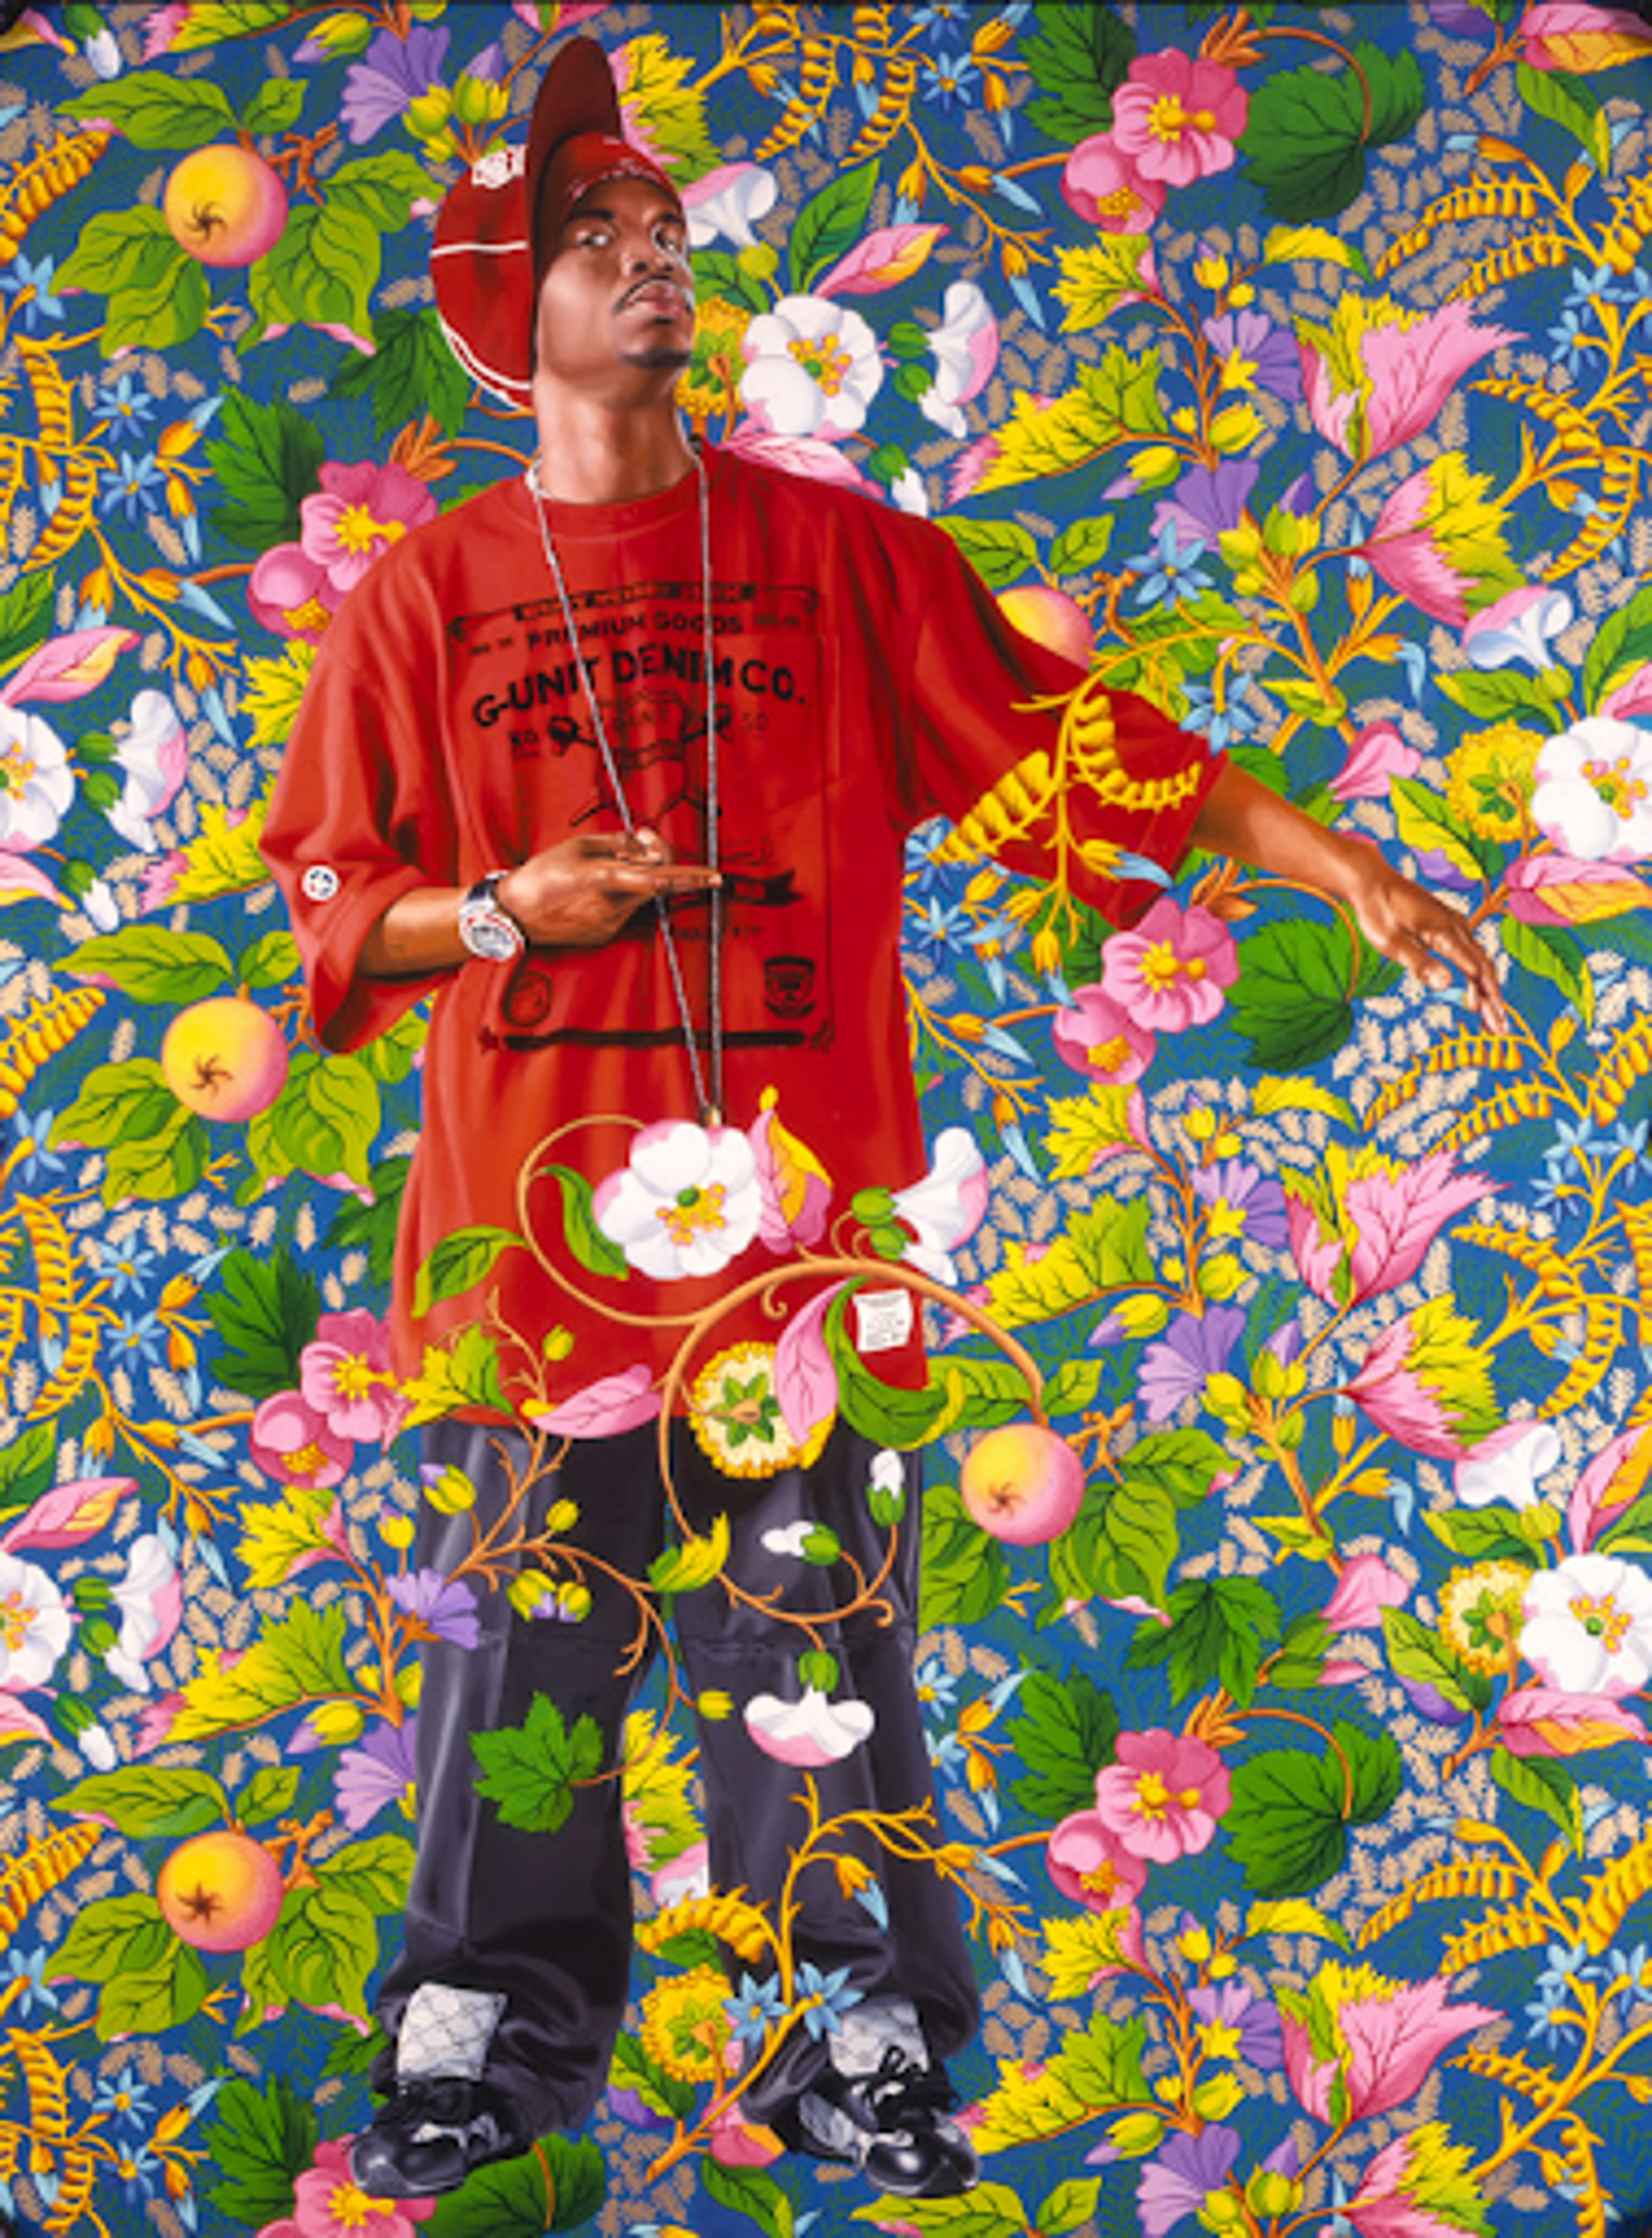 Kehinde Wiley’s Portrait Of A Venetian Ambassador, Aged 59, II. A portrait of a man in a red shirt, red cap, and blue jeans, posed with his left arm pointing outward surrounded by a bright floral background. 